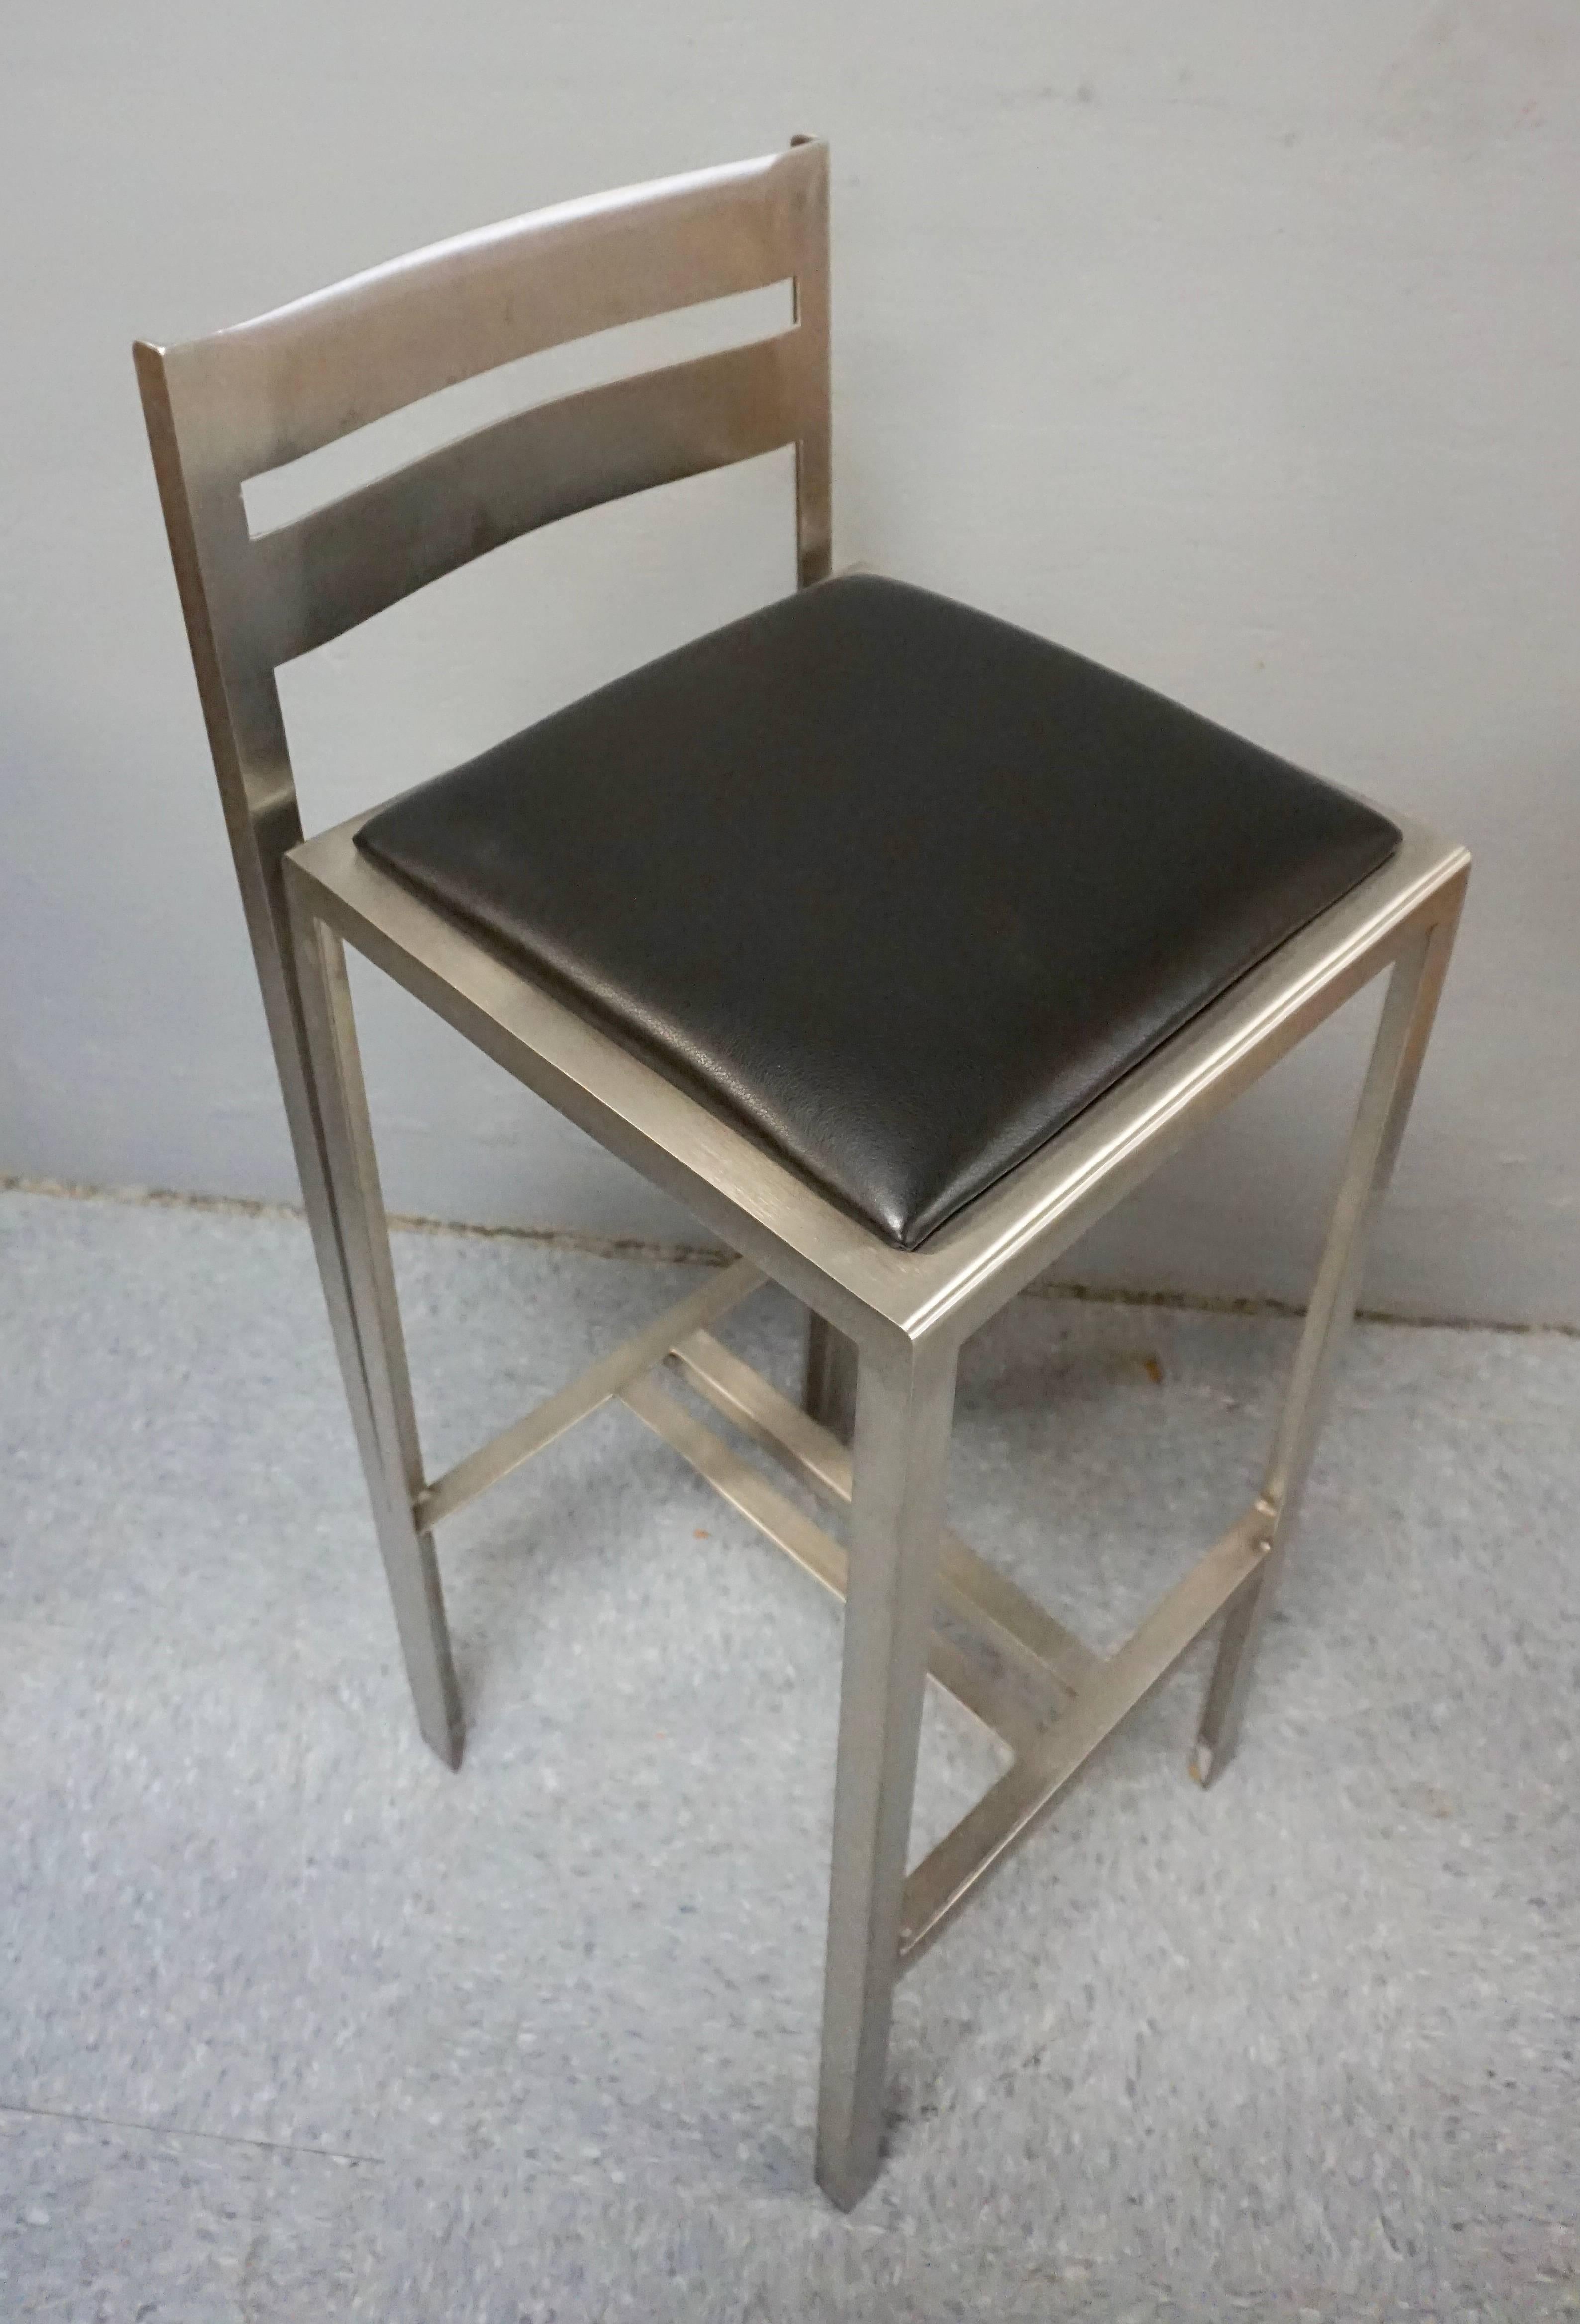 Brushed stainless steel with black leather seats. No rips or tears in the leather. Nice heavy construction. The back is 9 inches high from the seat. There are no bolts or screws used, as all pieces are welded together. The way they are constructed